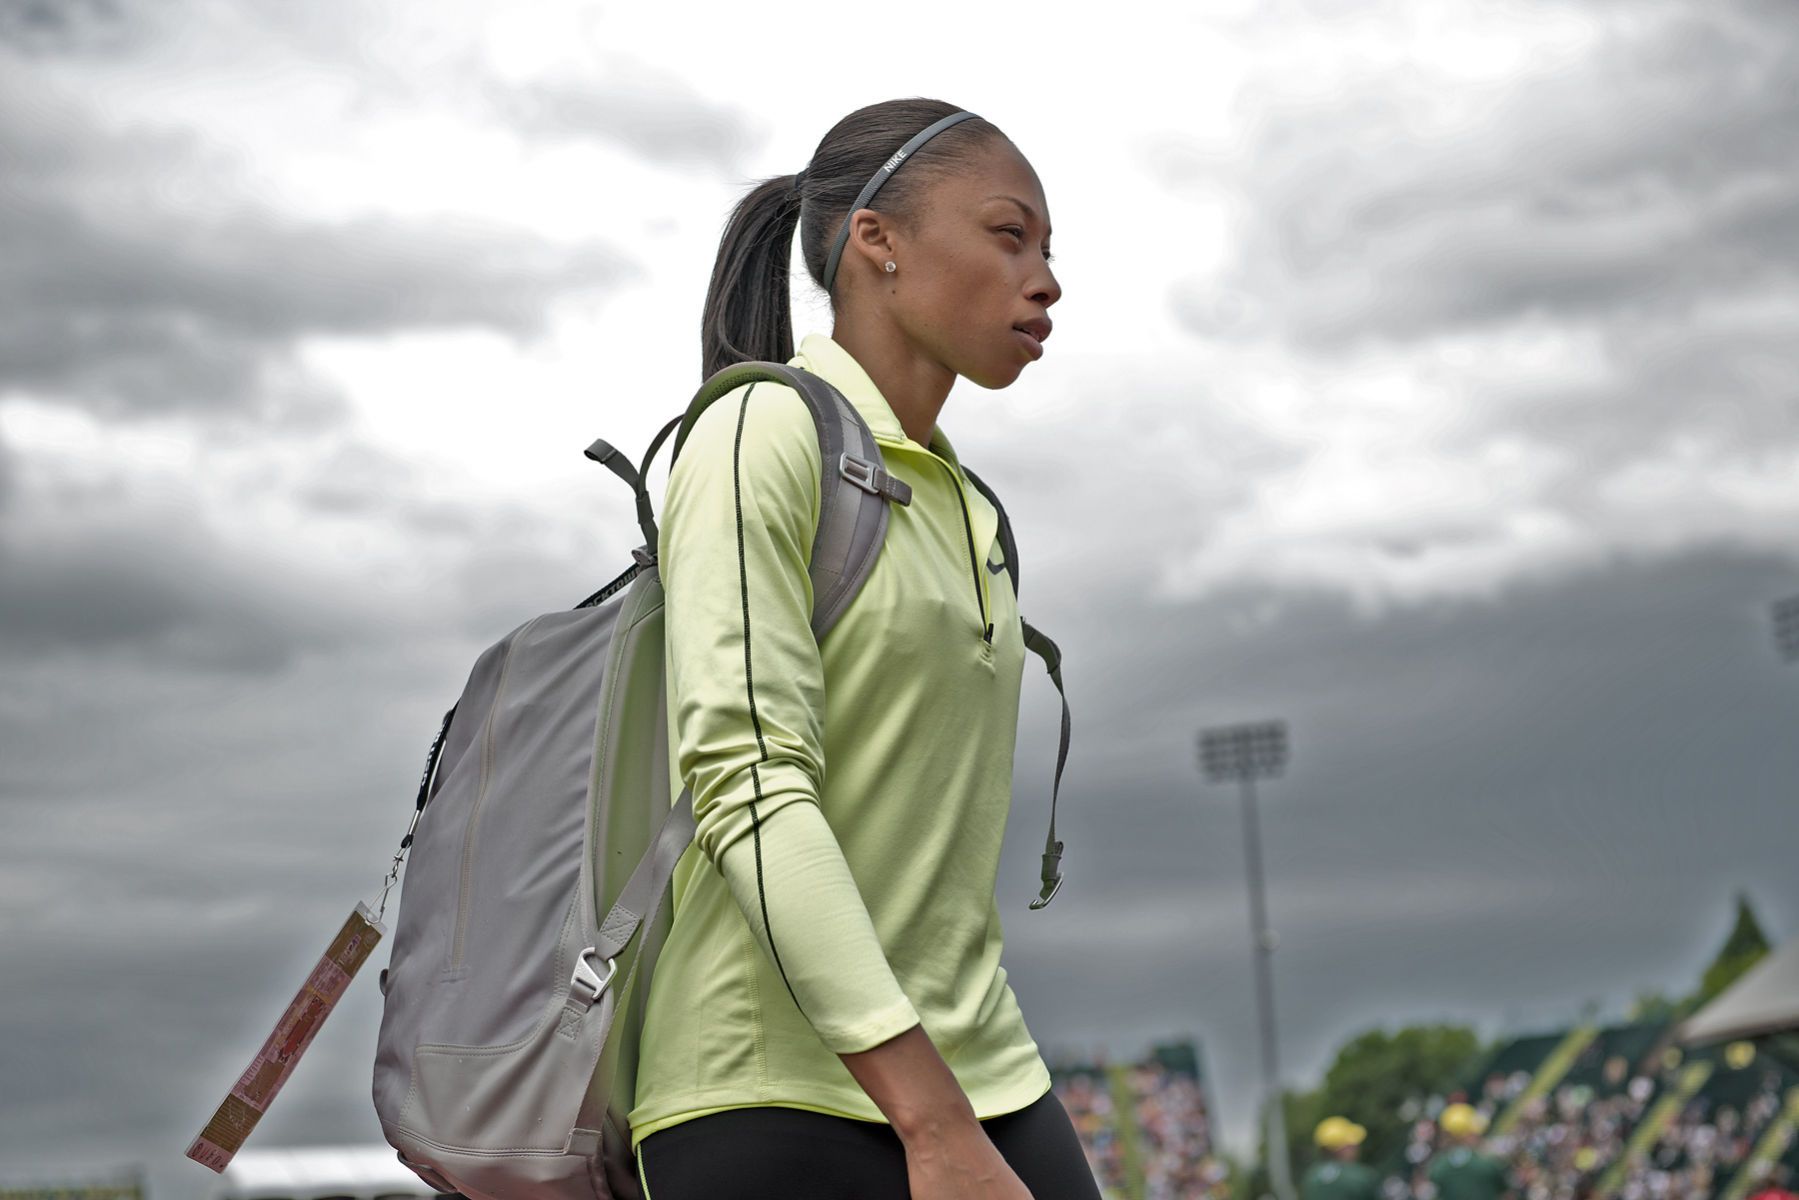 1ustrials2012_allyson_felix_track_and_field_image_jeff_cohen_photography_lb.jpg